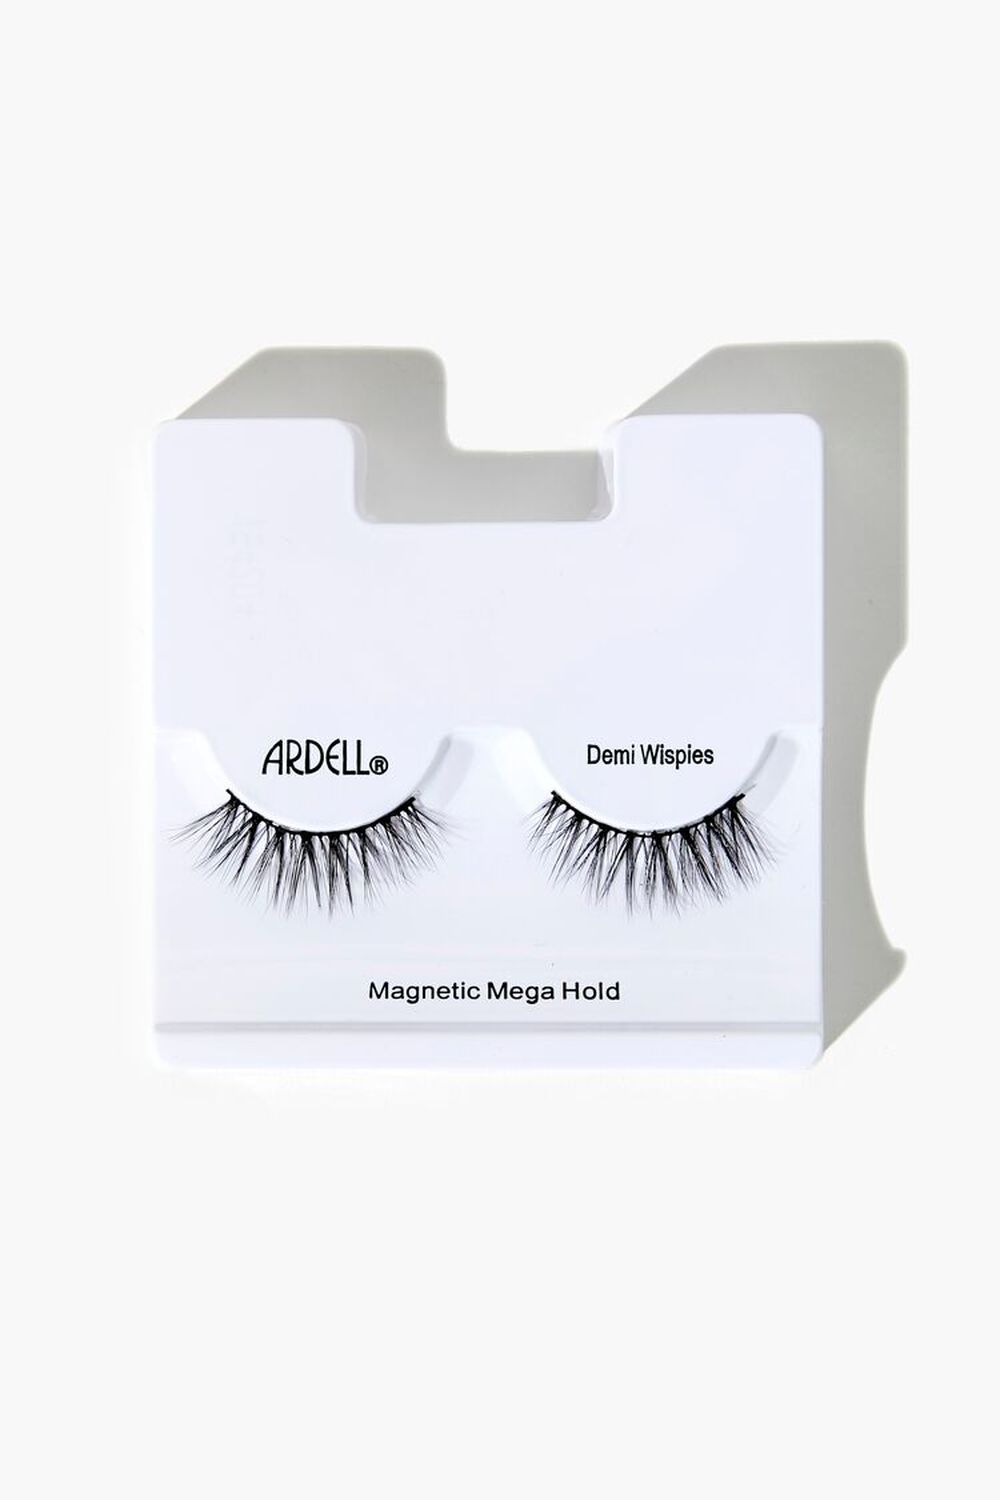 Ardell Magnetic Megahold Demi Wispies False Lashes, image 2